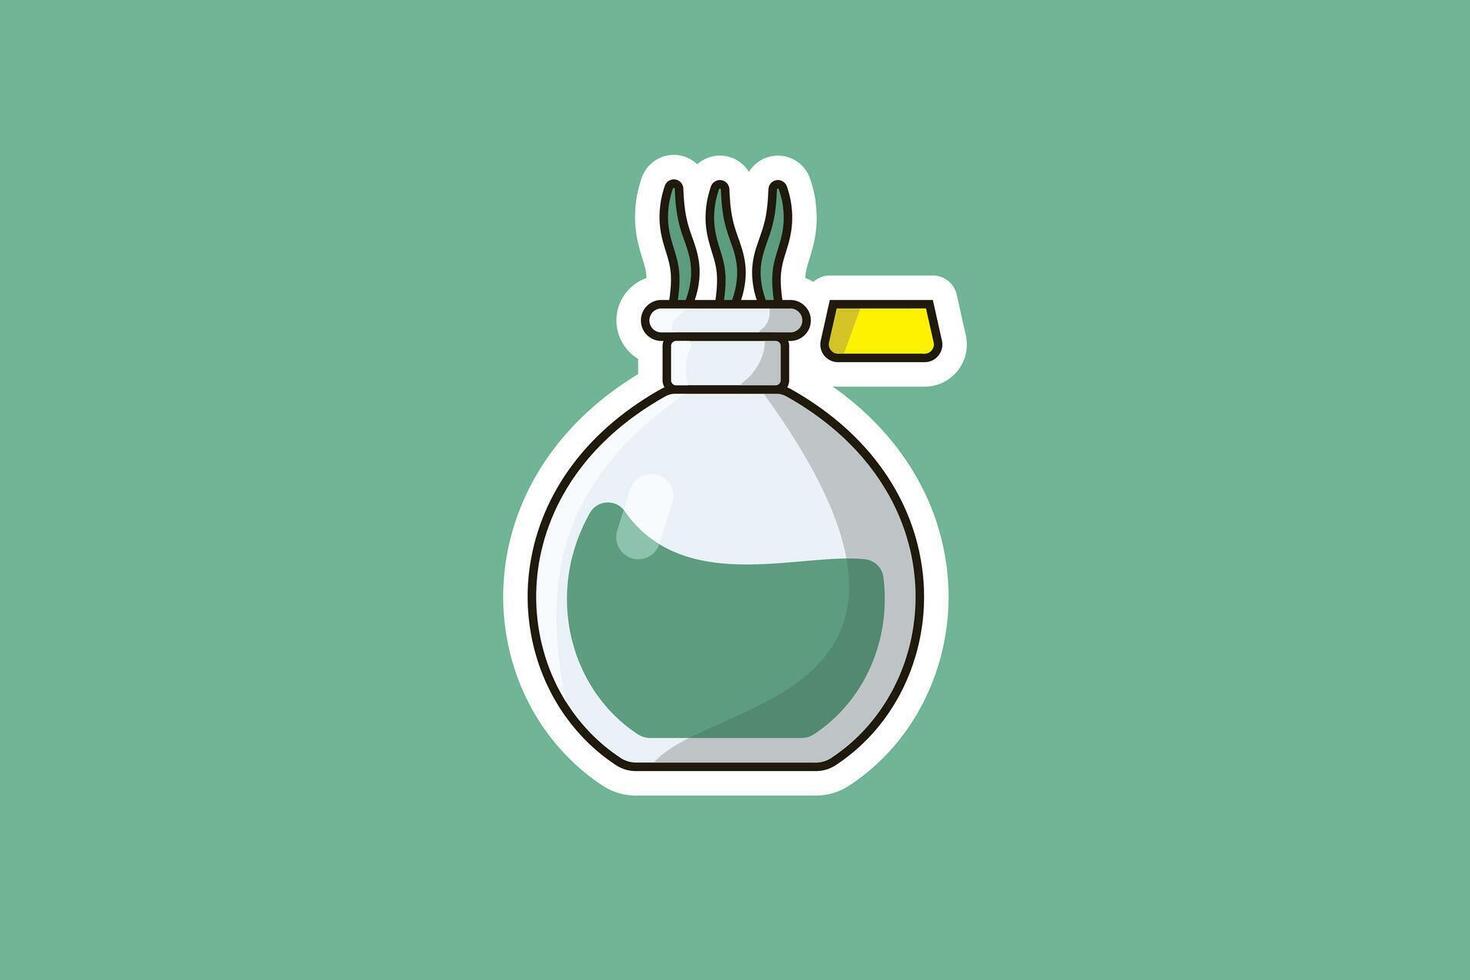 Witch Potion Bottle Sticker vector illustration. Science object icon concept. Halloween potion icon. Halloween drink sticker design. Bottle of Green Poison sticker vector design.